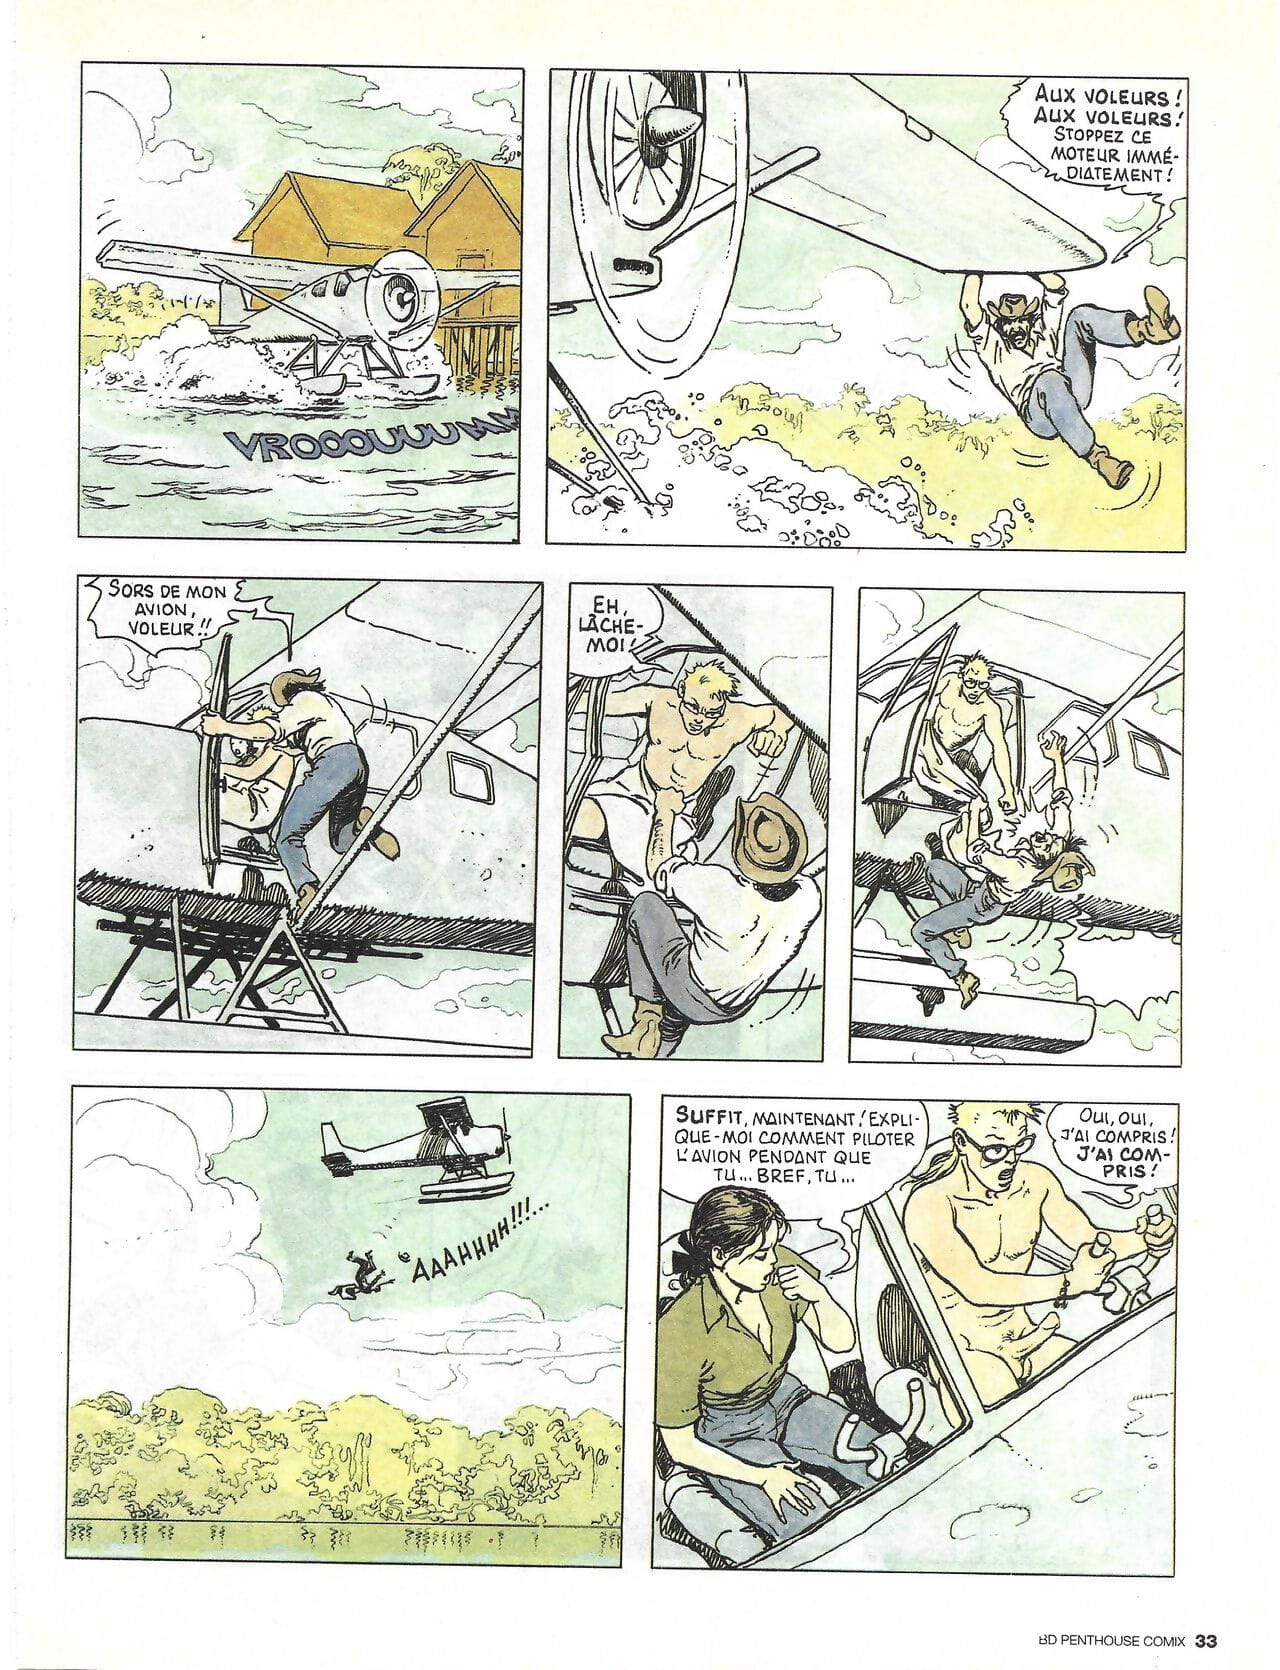 BD penthouse no. 06 Onderdeel 2 page 1